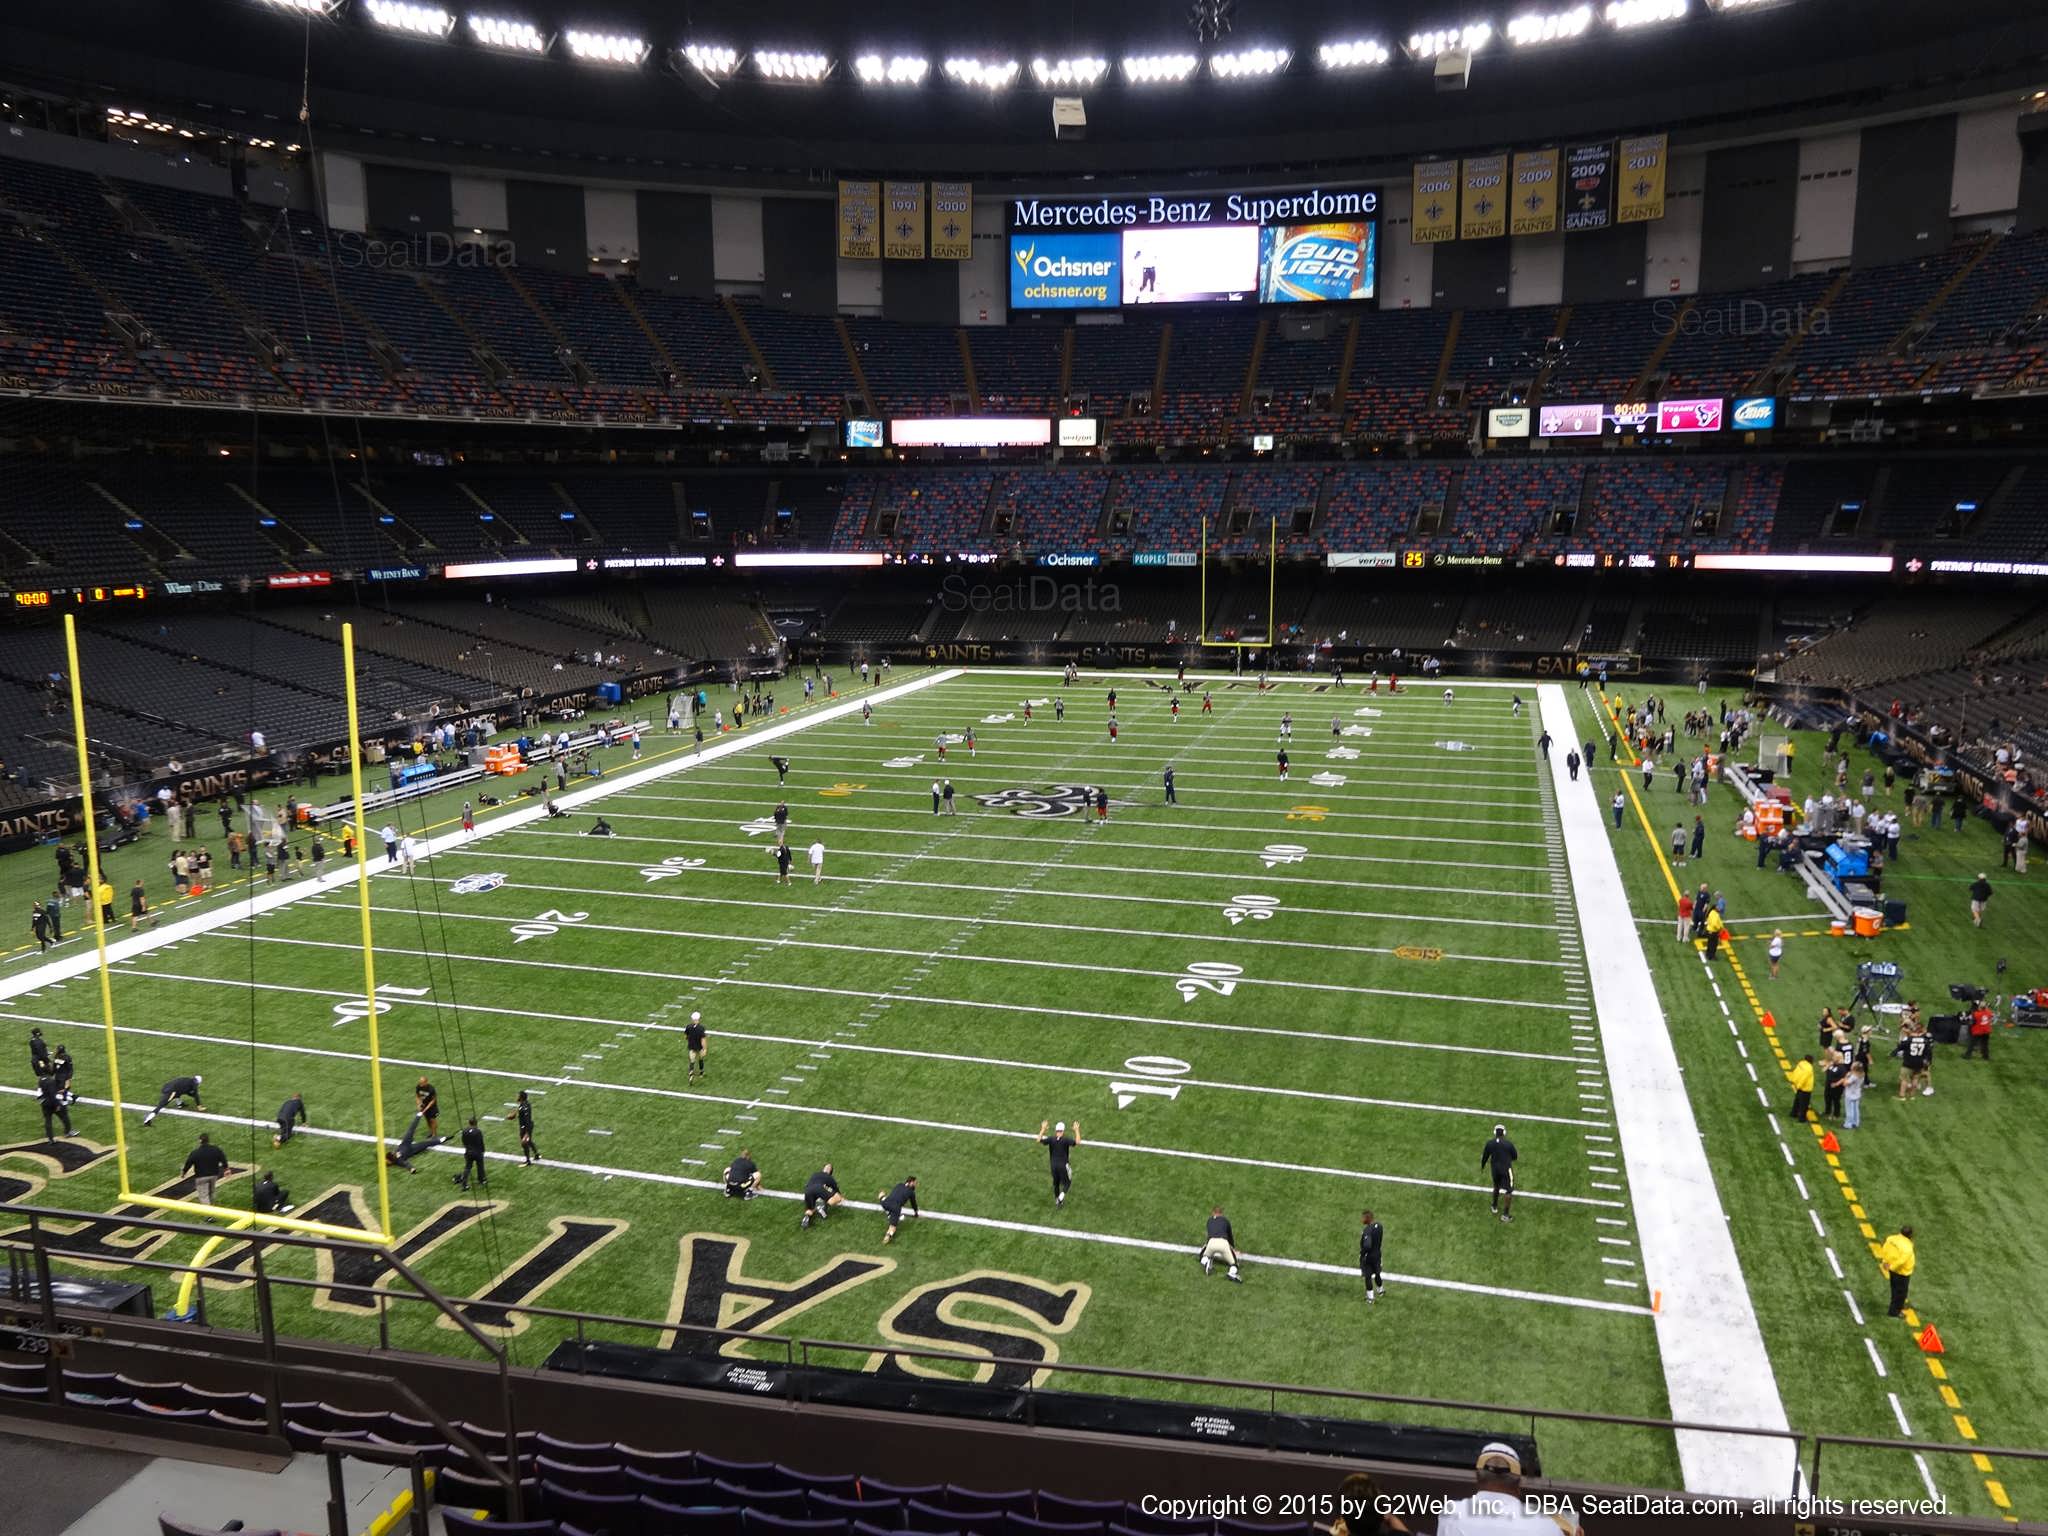 Seat view from section 322 at the Mercedes-Benz Superdome, home of the New Orleans Saints